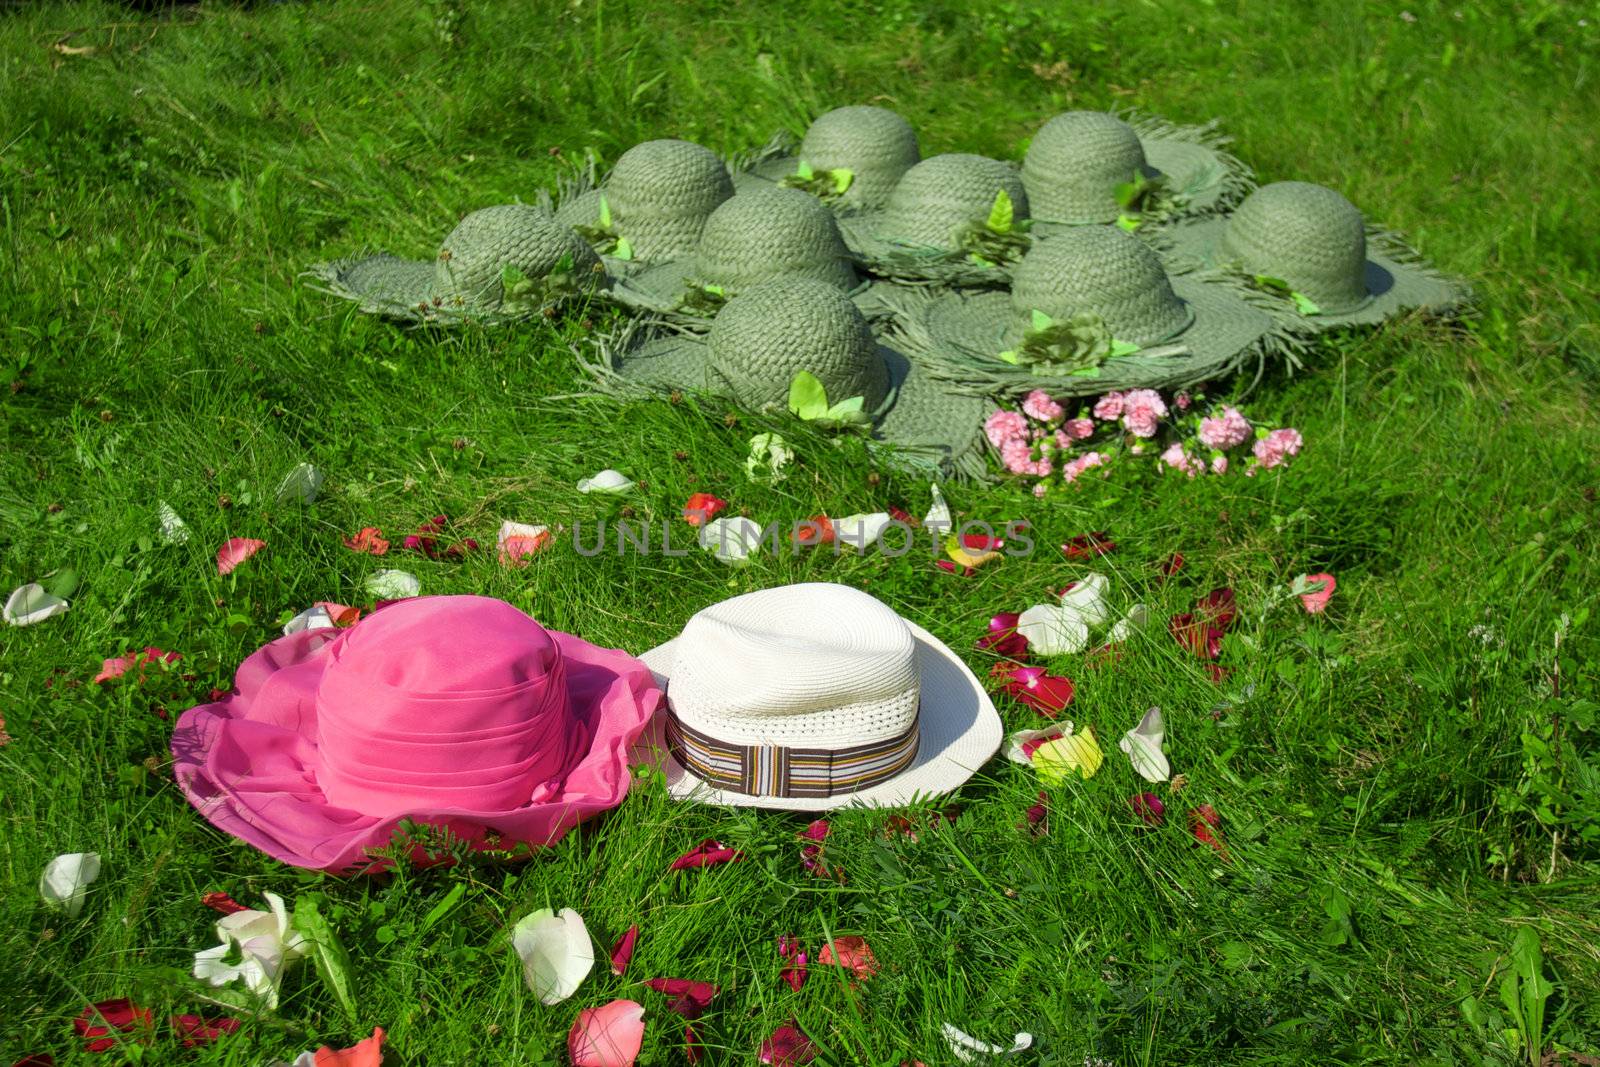 Hats on the green grass background